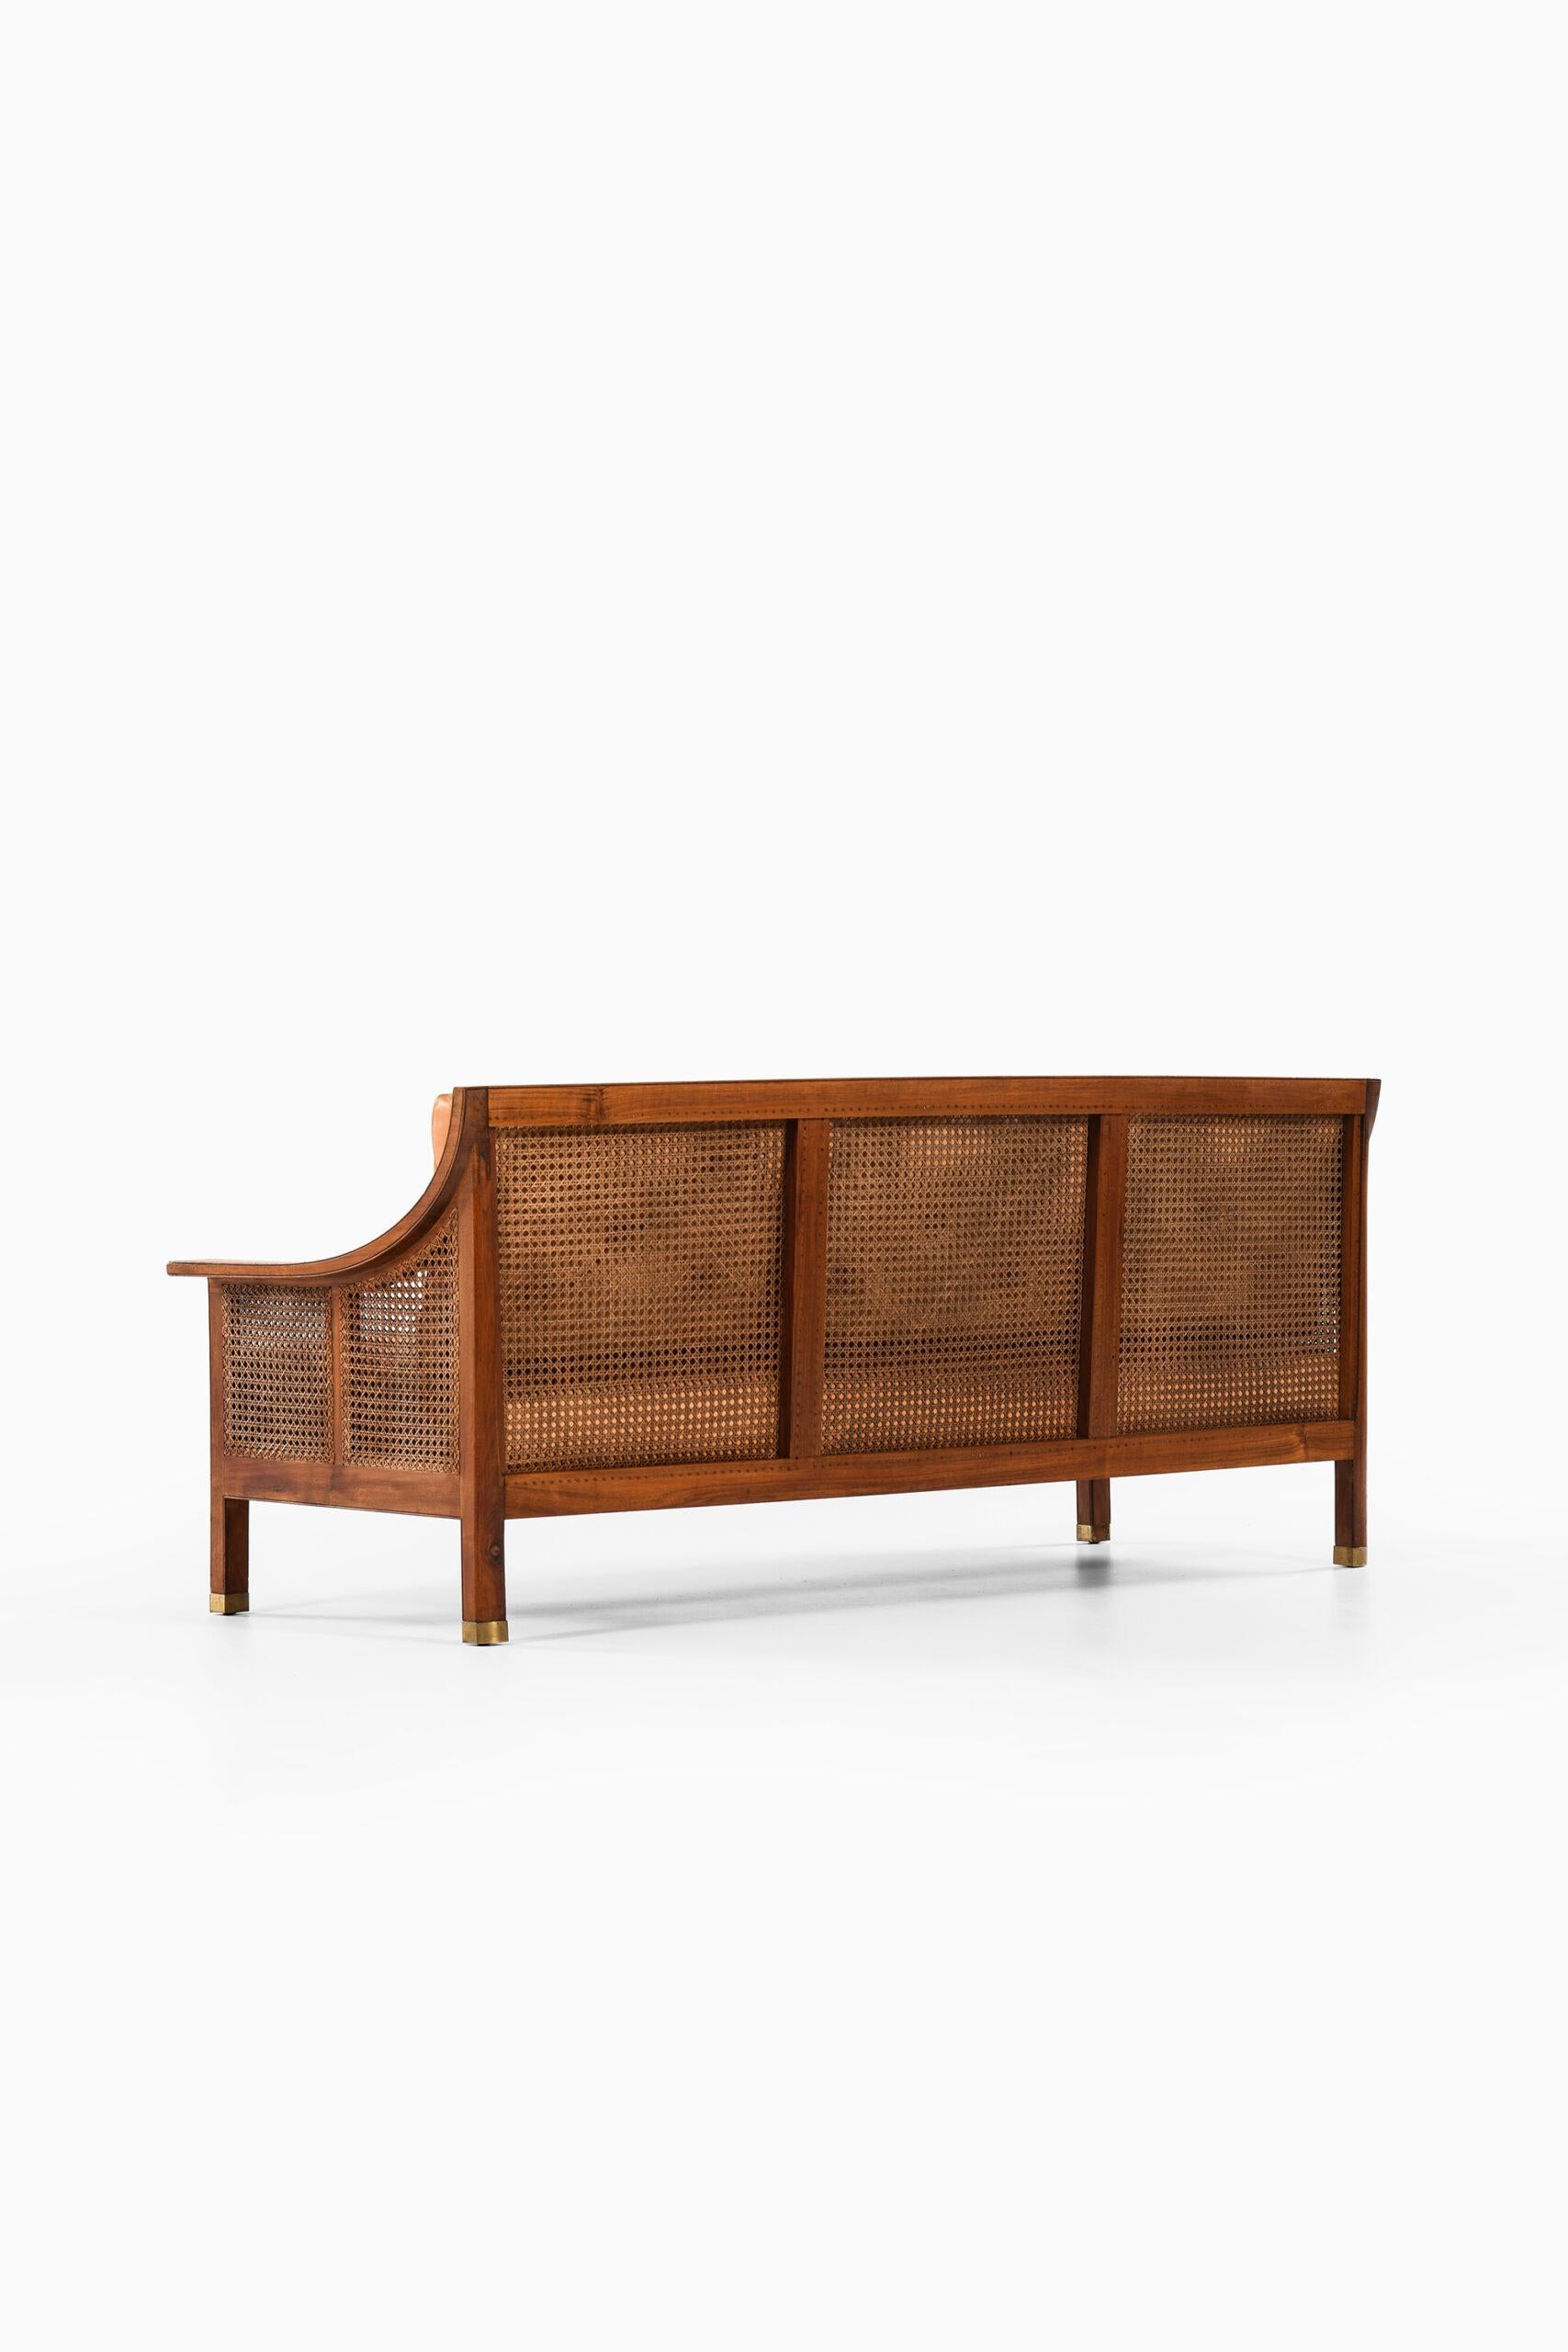 Arne Jacobsen Sofa Produced by Cabinetmaker Otto Meyer in Denmark For Sale 10